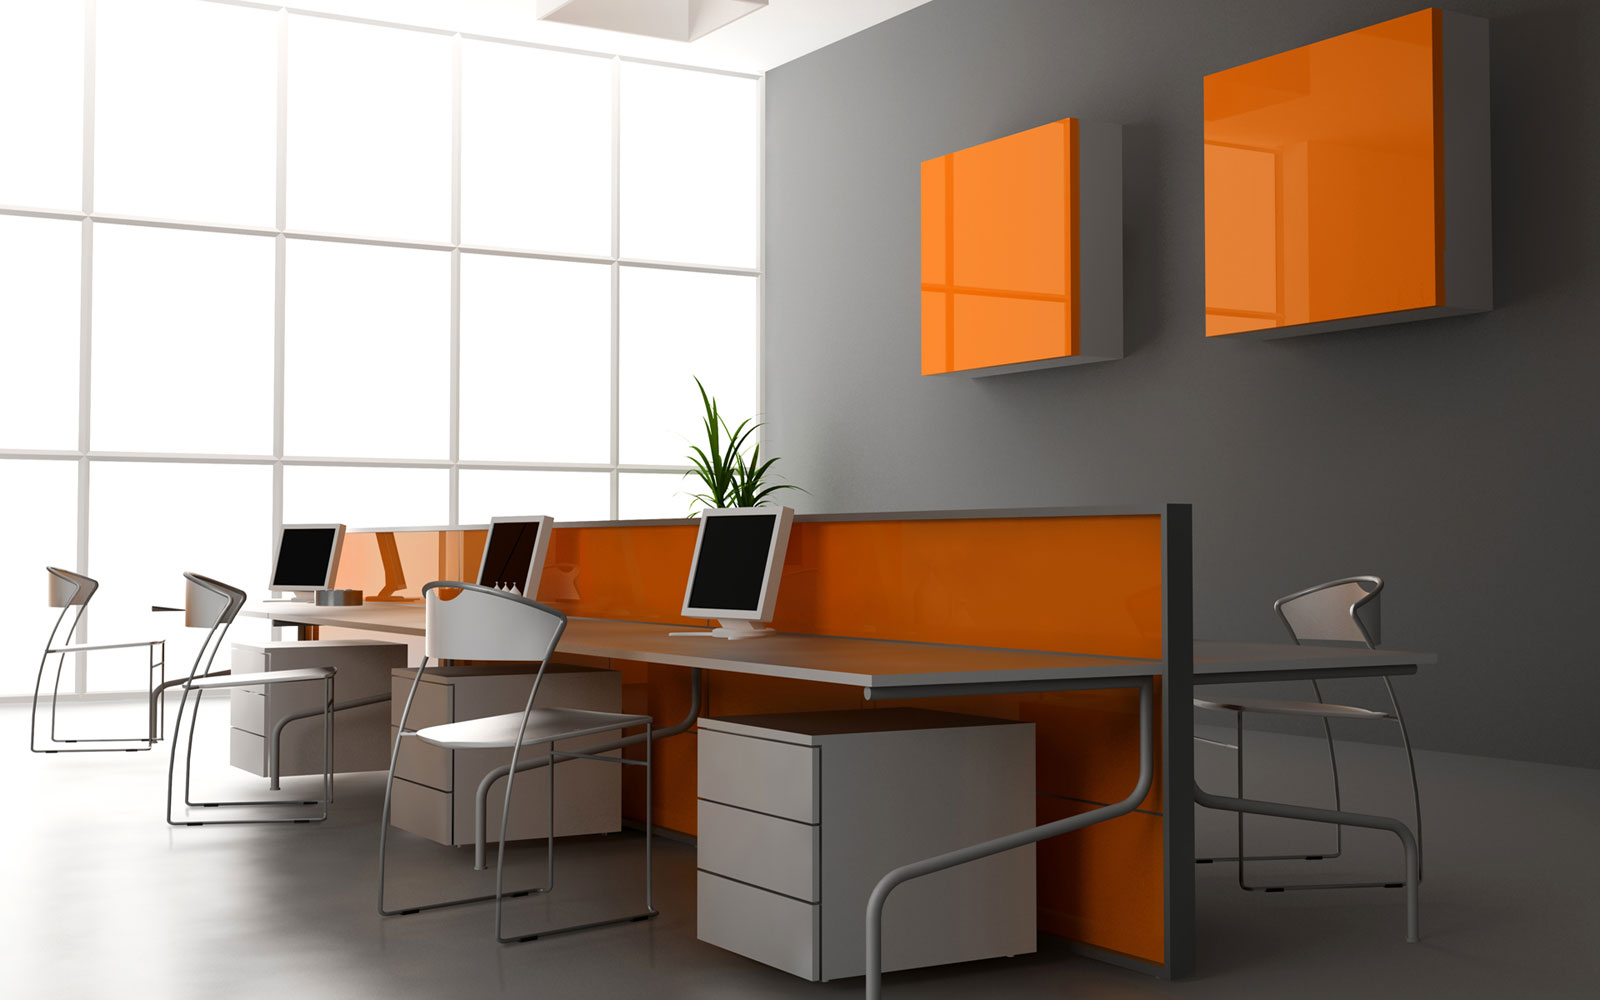 Modern Office Applying Marvelous Modern Office Interior Design Applying Grey Also White And Orange Room Color Furnished With Elongated Desk Completed With Computer Sets And Chair Interior Design Trying To Make The Unique Office Interior Design